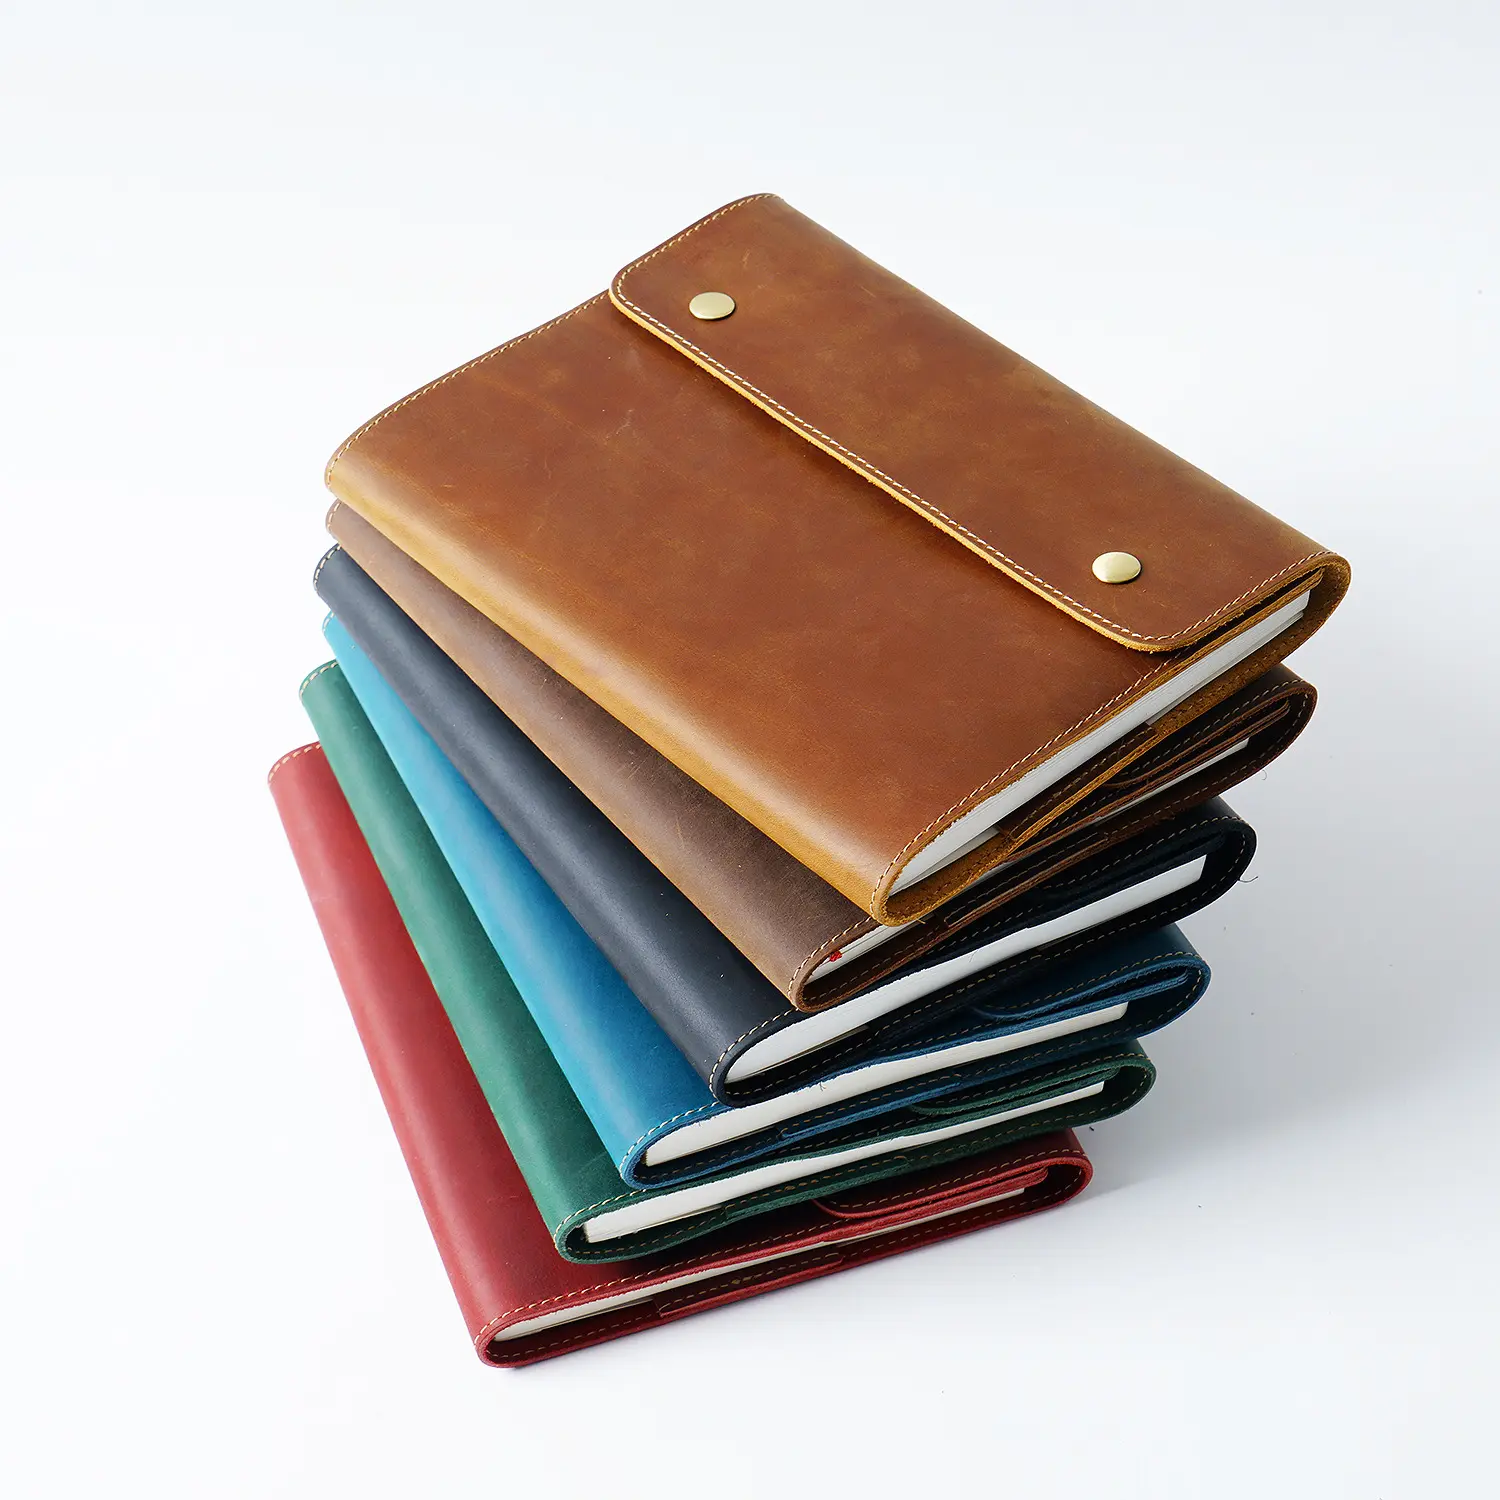 Premium Quality Leather Handmade Notebook With 3 Card Slot Vintage Leather Journal Diary Men Women Gift for Him Her